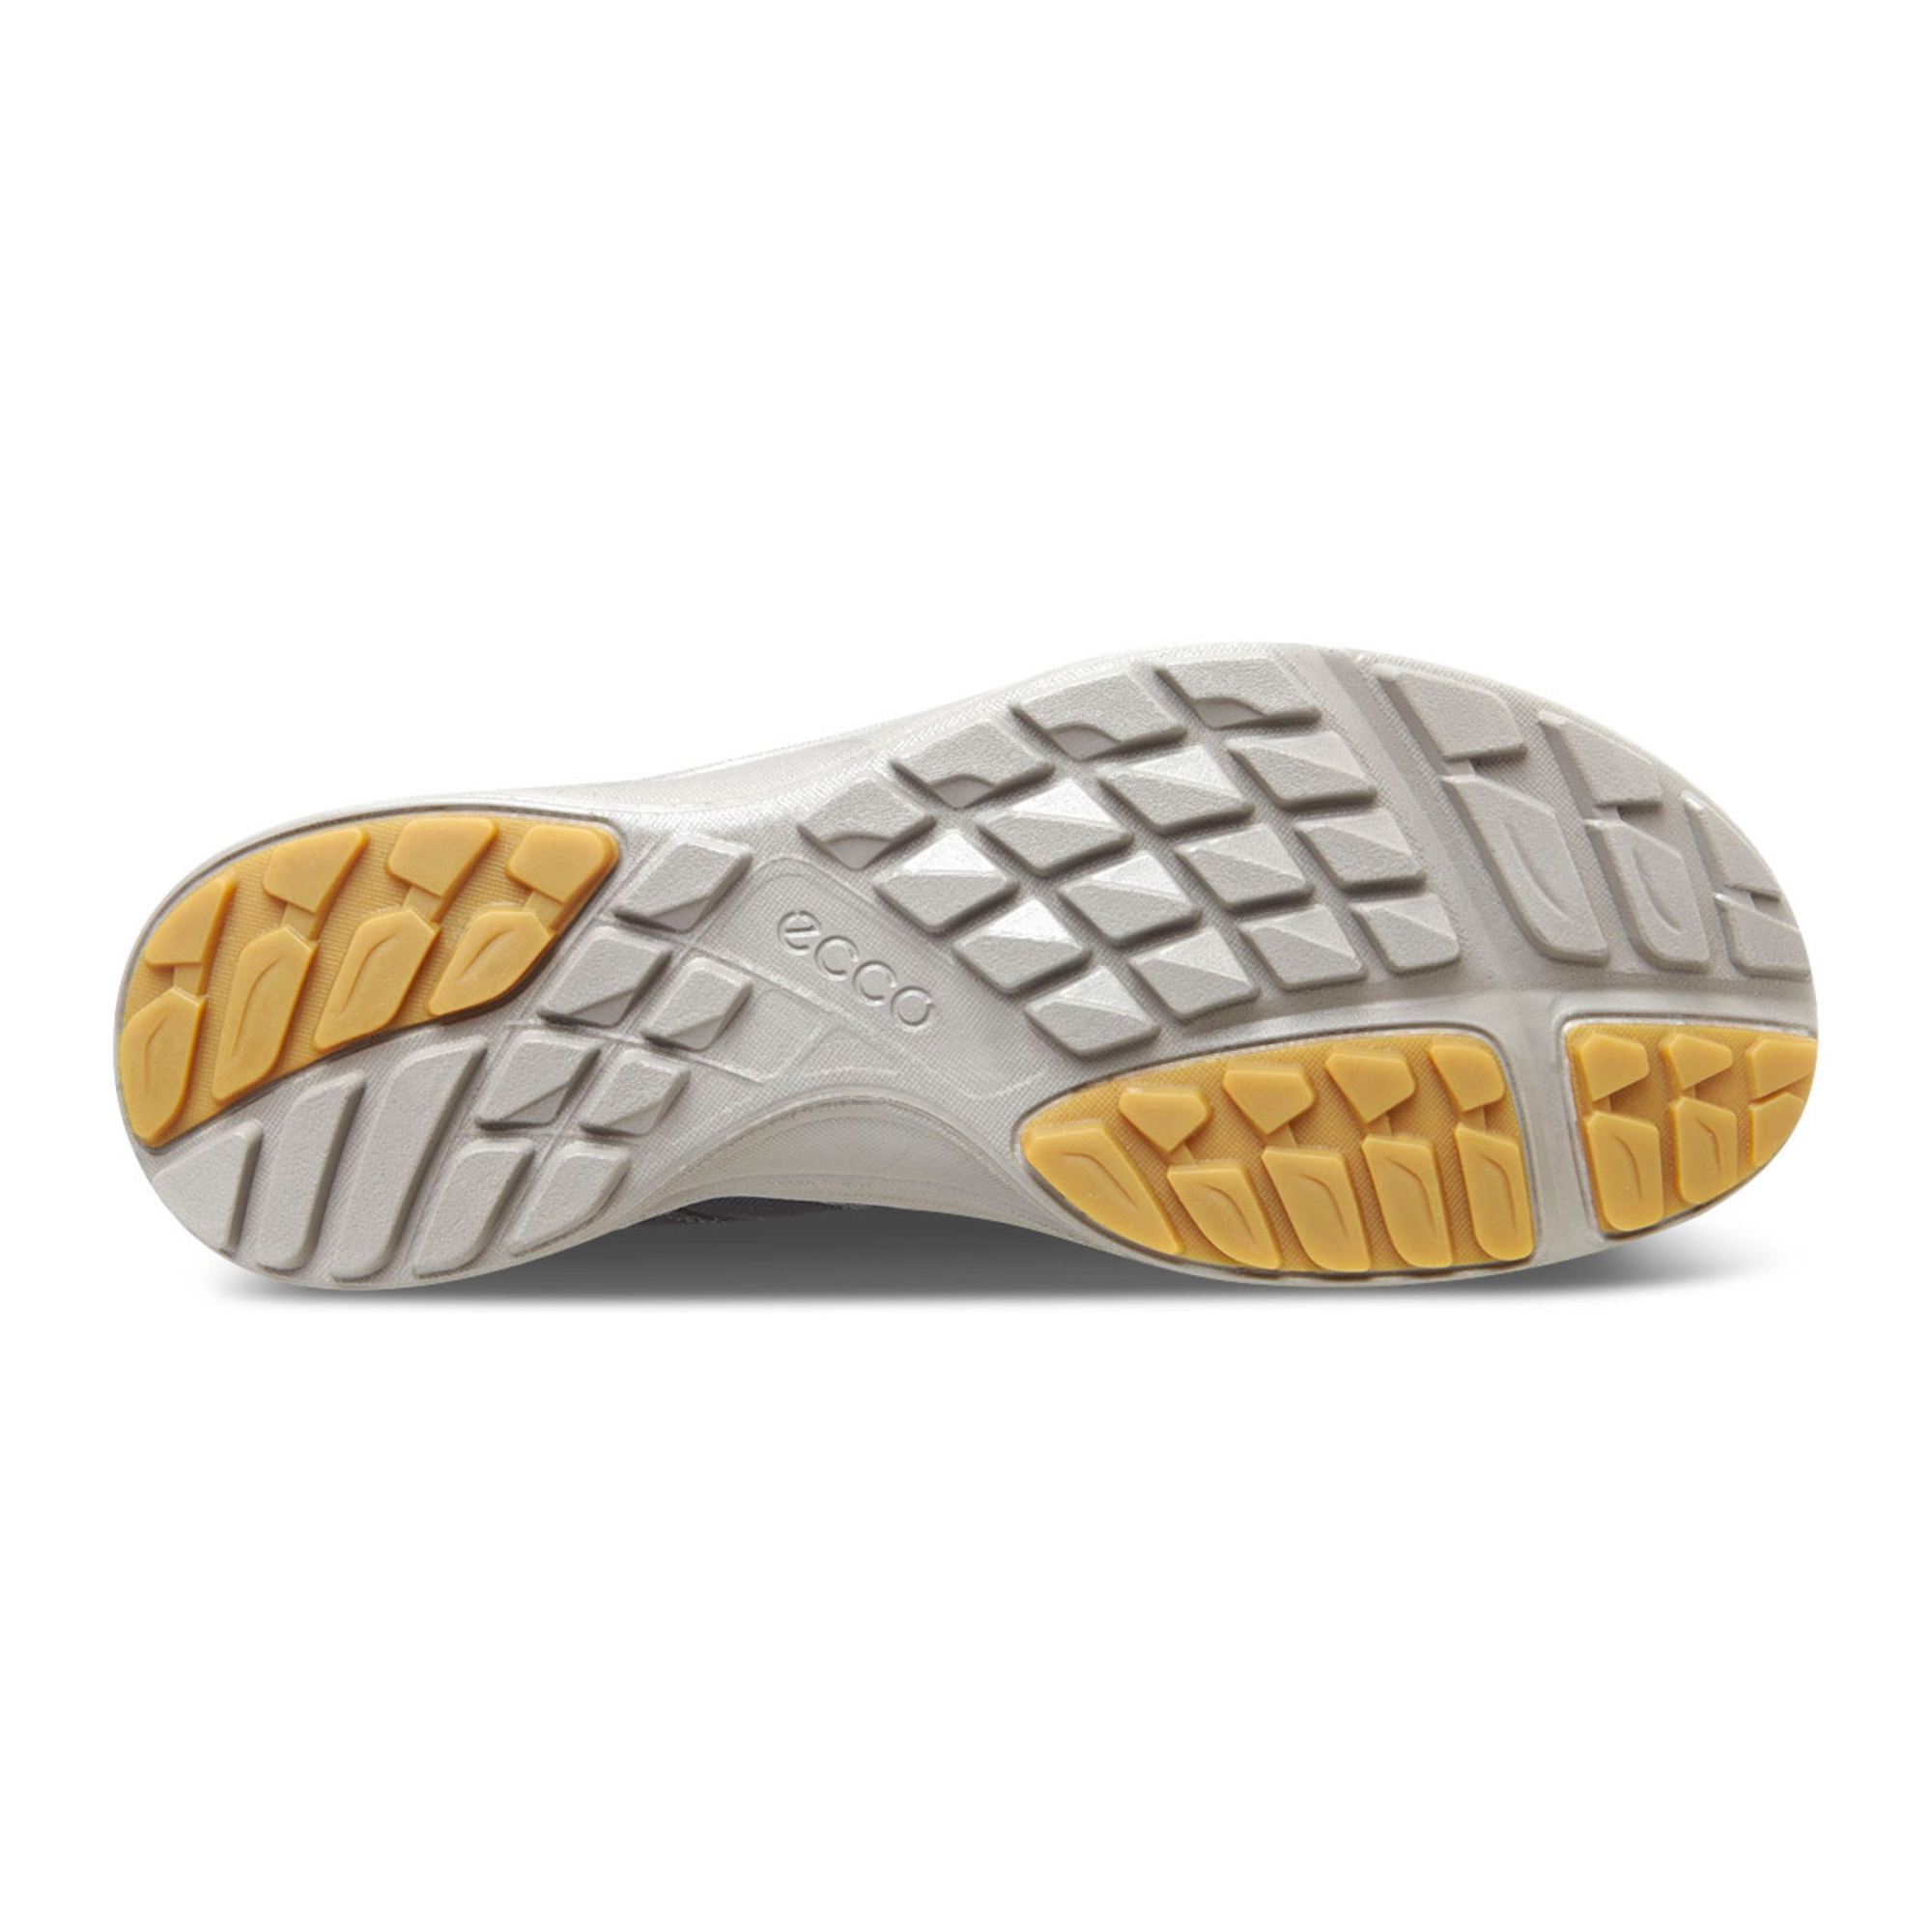 Ecco Mens Terracruise Slide 39 Products - Veryk - Veryk many product, quick response, safe your money!